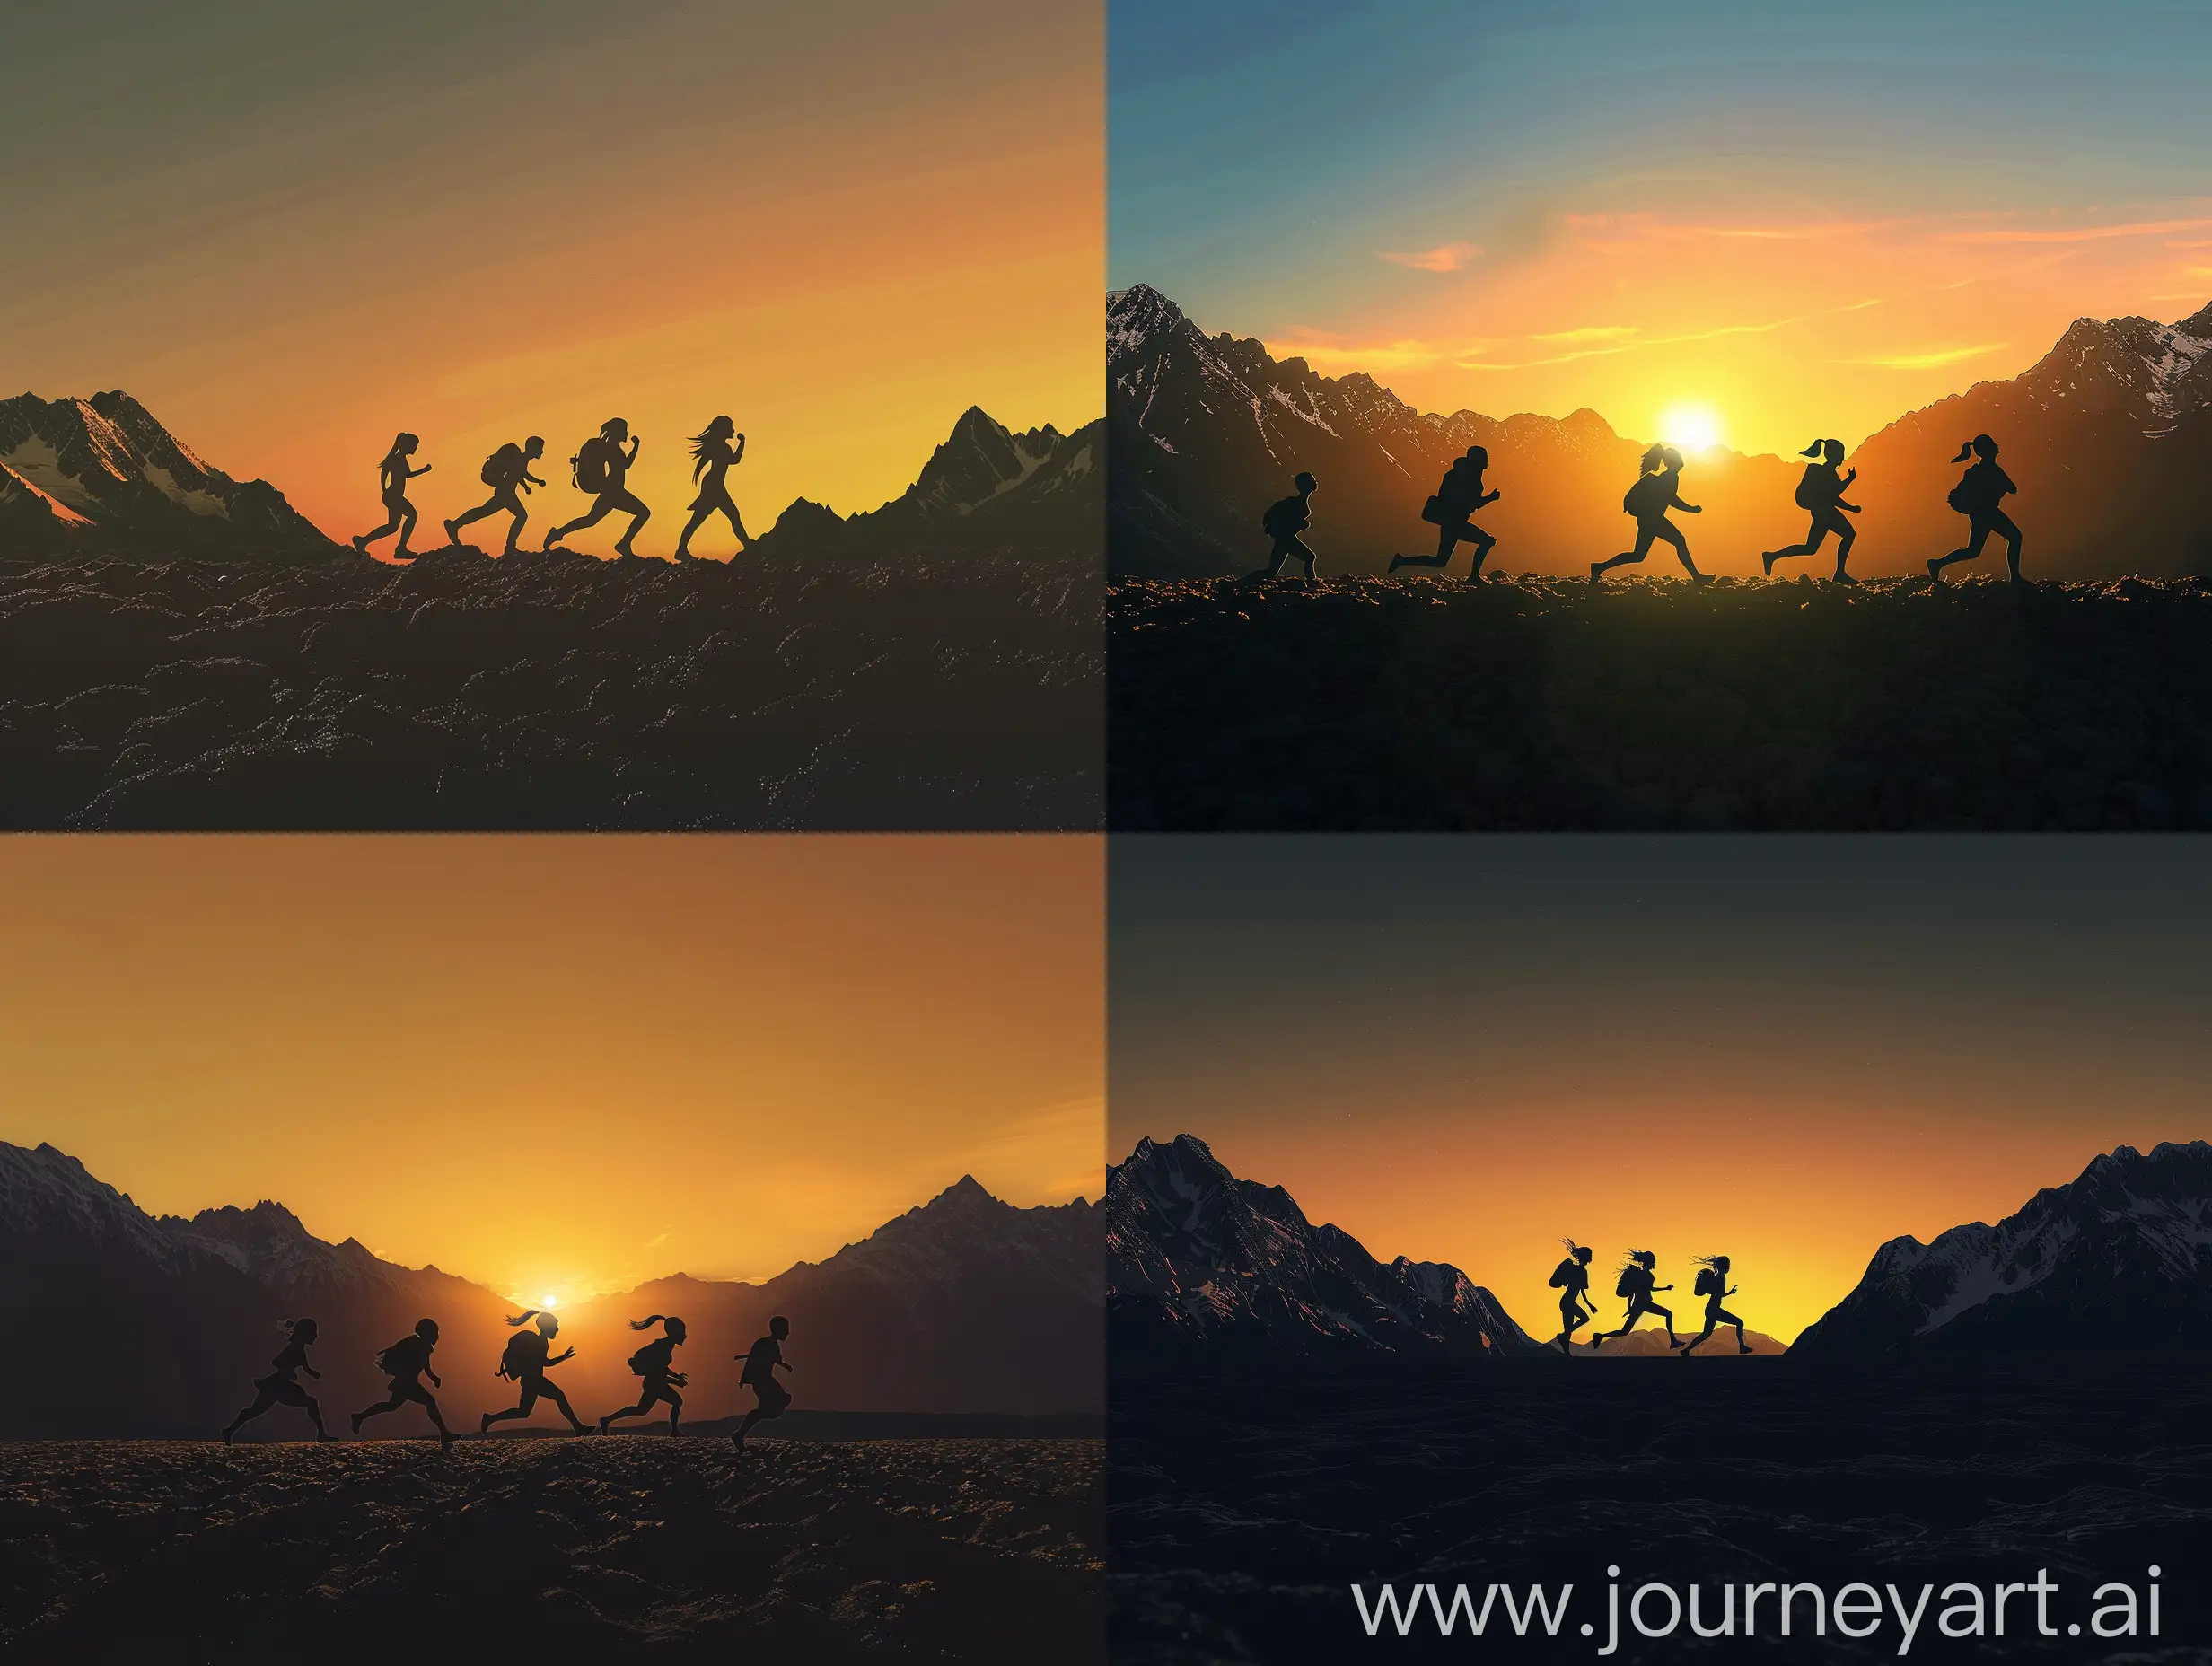 clear sunset, mountains left and right, silhouettes of four fantasy small travelers compared to the mountains in the center running to right, front view, beneath image black earth, side view --cref https://cdn.discordapp.com/attachments/1110487272400375889/1220035852936286318/1710948322157n5spx63t1.png?ex=660d79ee&is=65fb04ee&hm=71ff0cf48ee5644ce1ac19351c7d60989a47c87730c7a28d1a69c6cb8927f138&